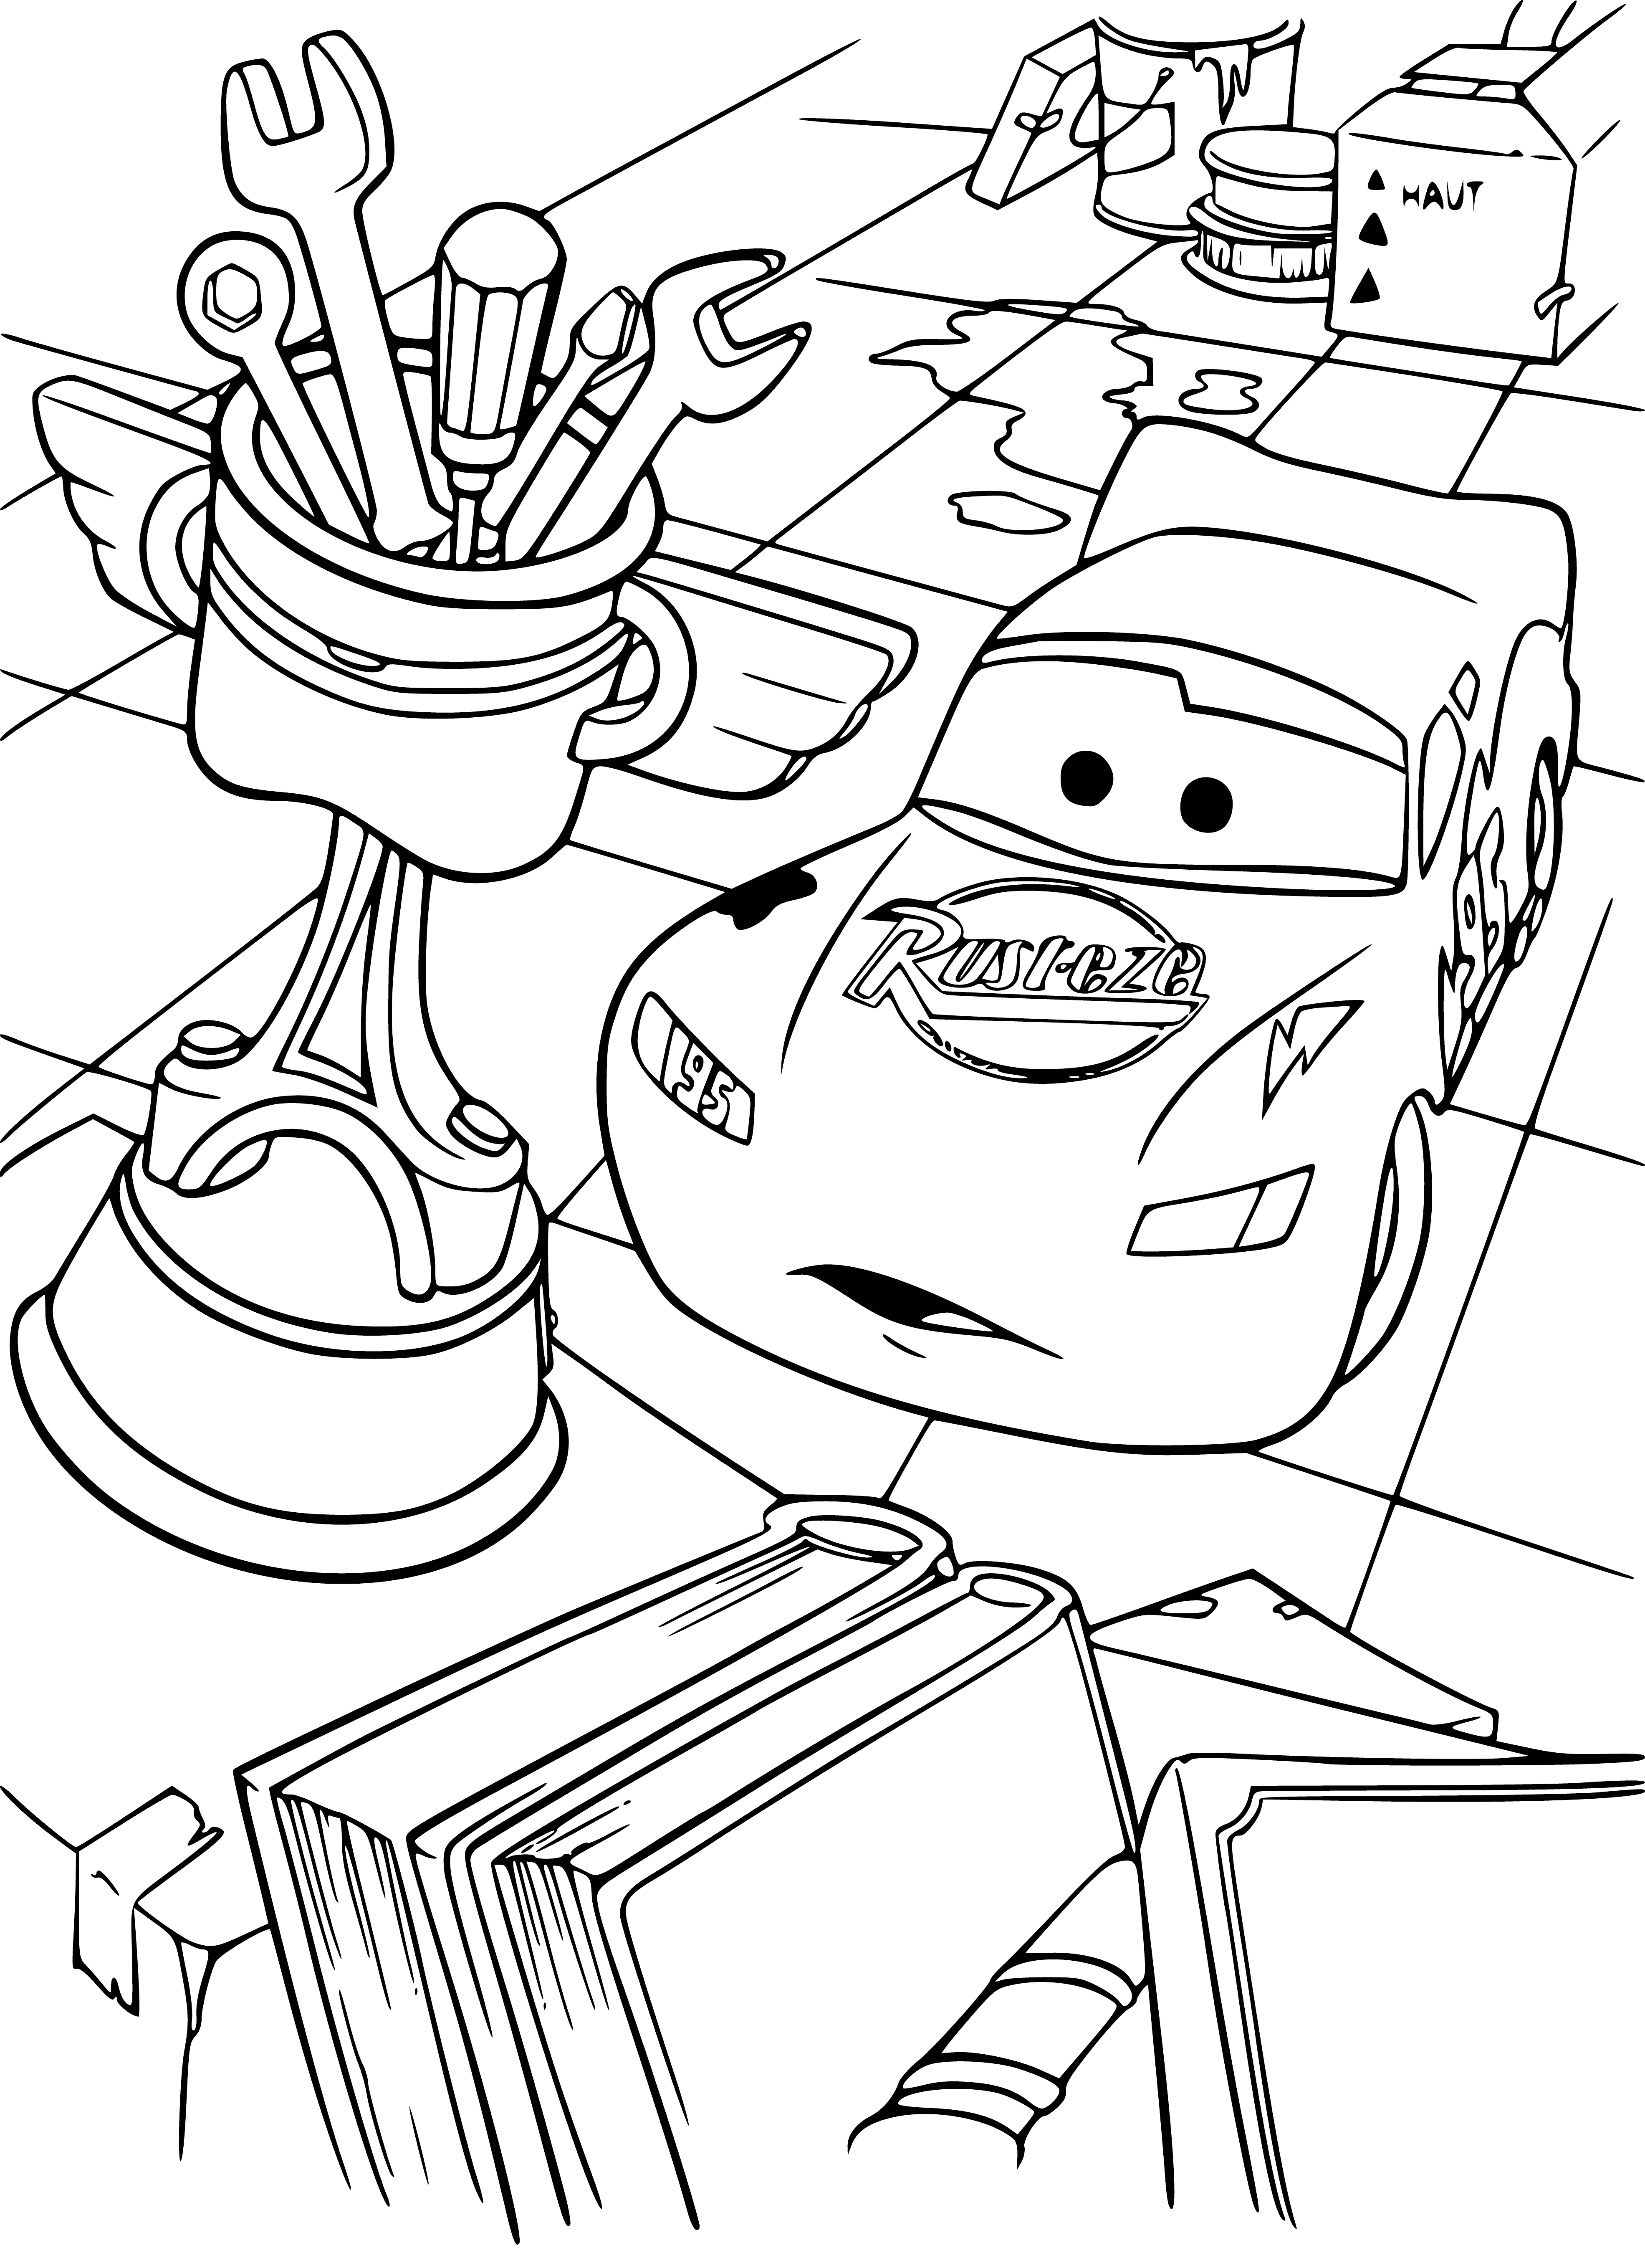 coloring page: Hudson Piston Cup is a blue race car from Cars movies with white stripes and the number 51.